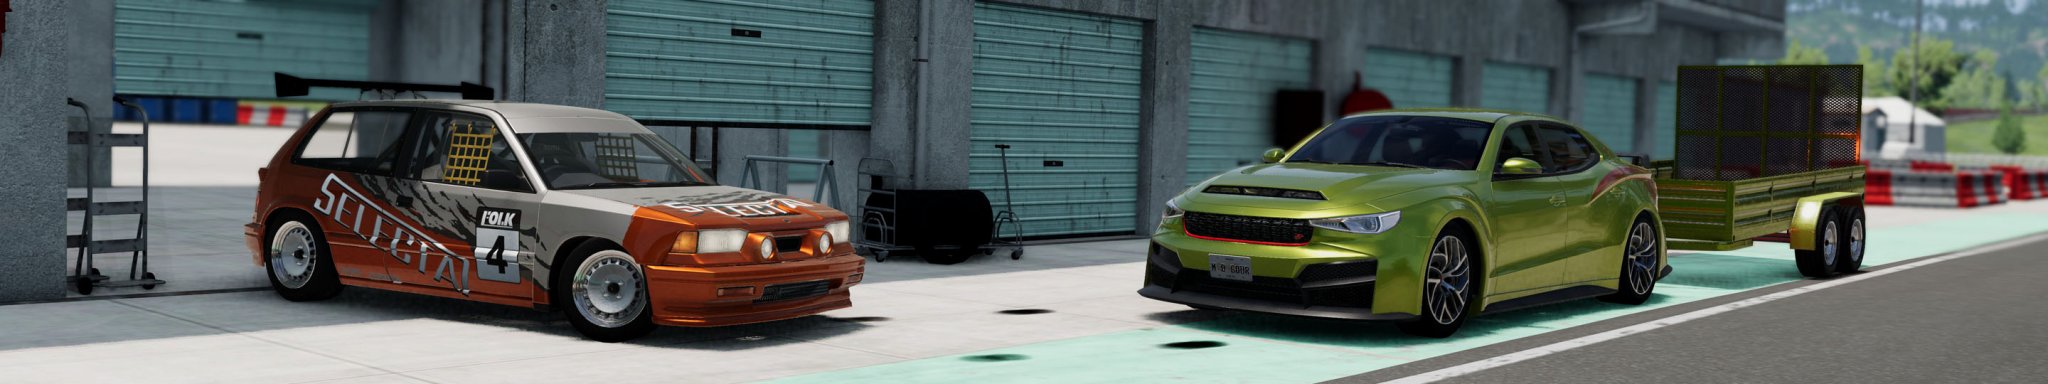 4 BeamNG TRACK CAR and TRAILER copy.jpg